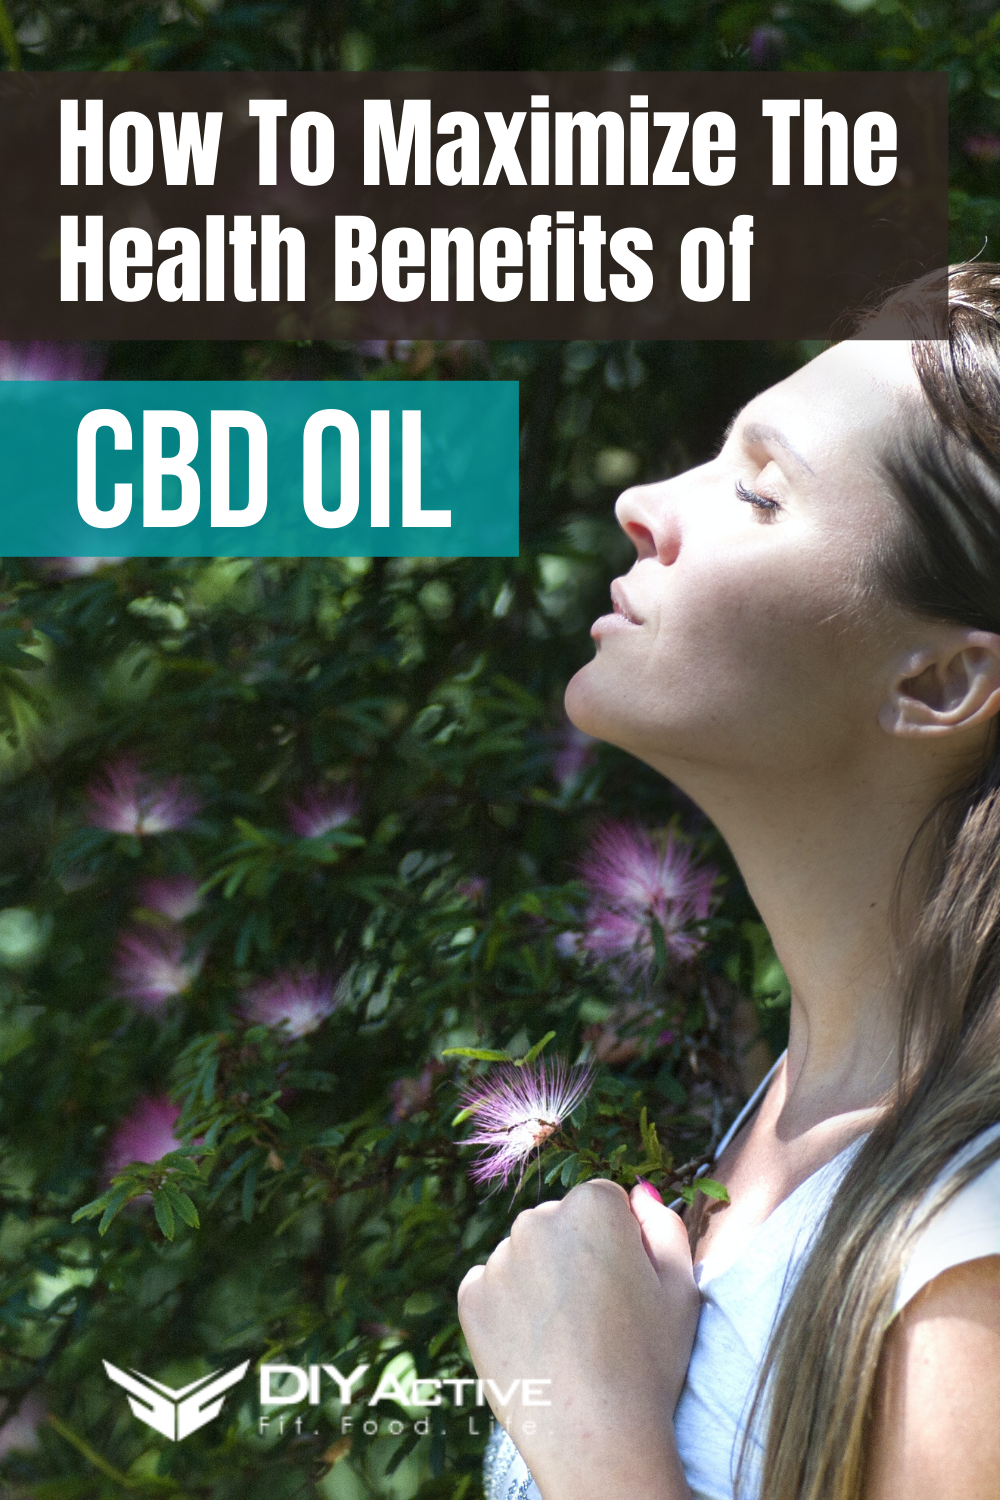 How To Maximize The Health Benefits of CBD Oil